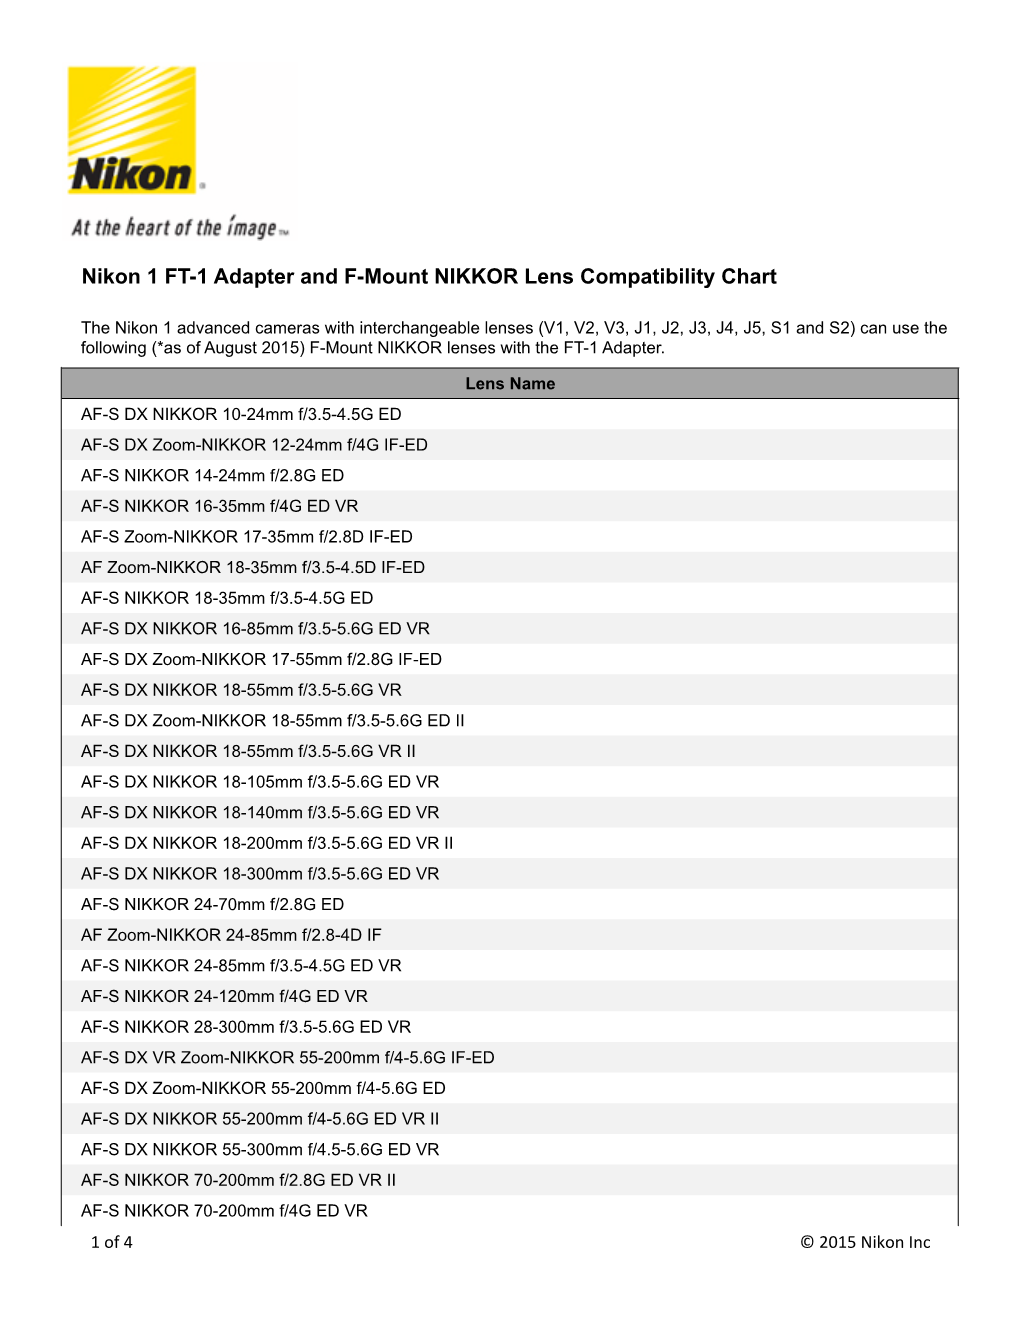 Nikon 1 FT-1 Adapter and F-Mount NIKKOR Lens Compatibility Chart